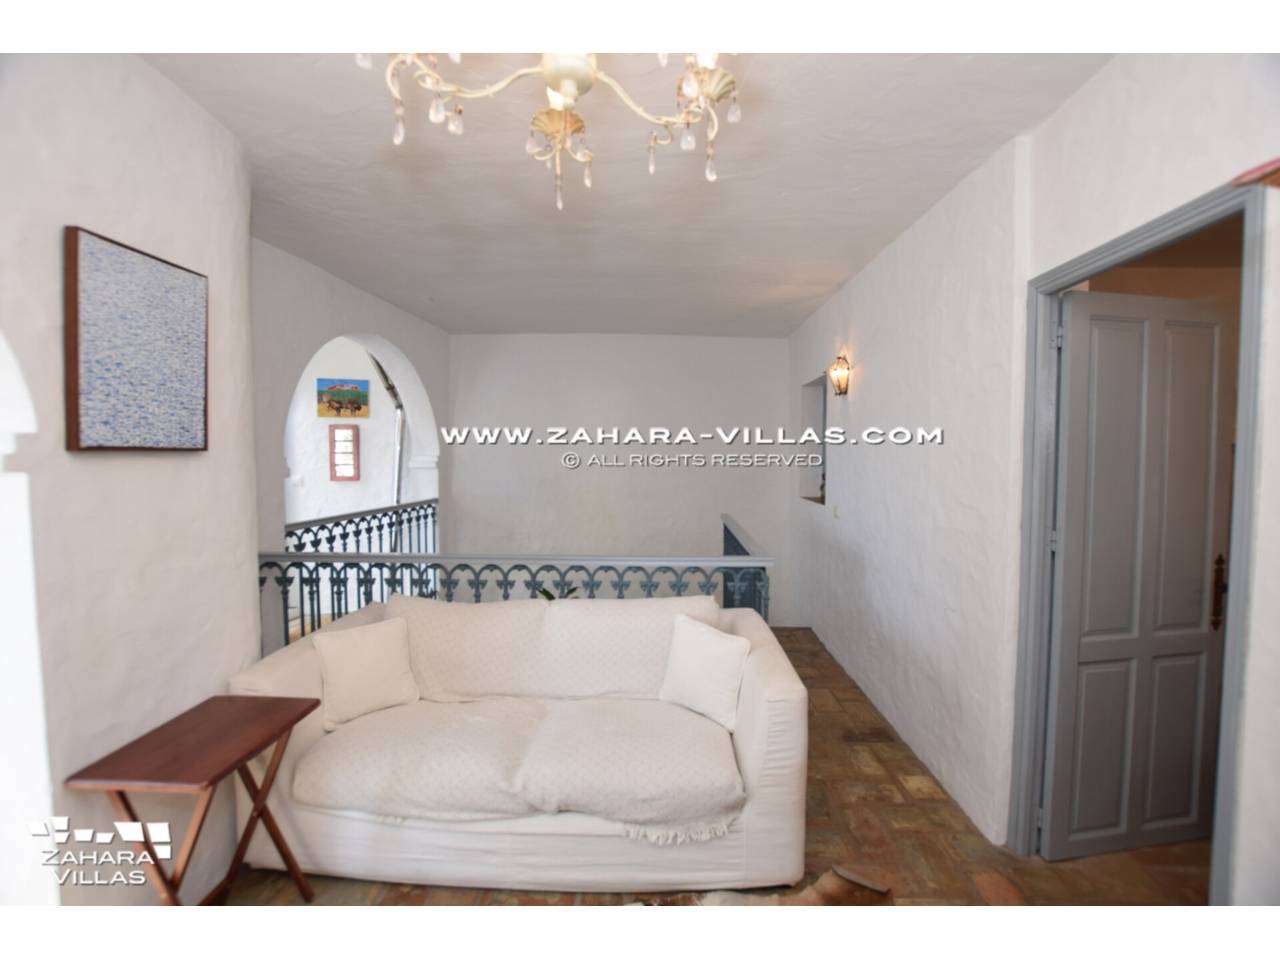 Imagen 43 de Magnificent House with central patio, in the historic center of the town